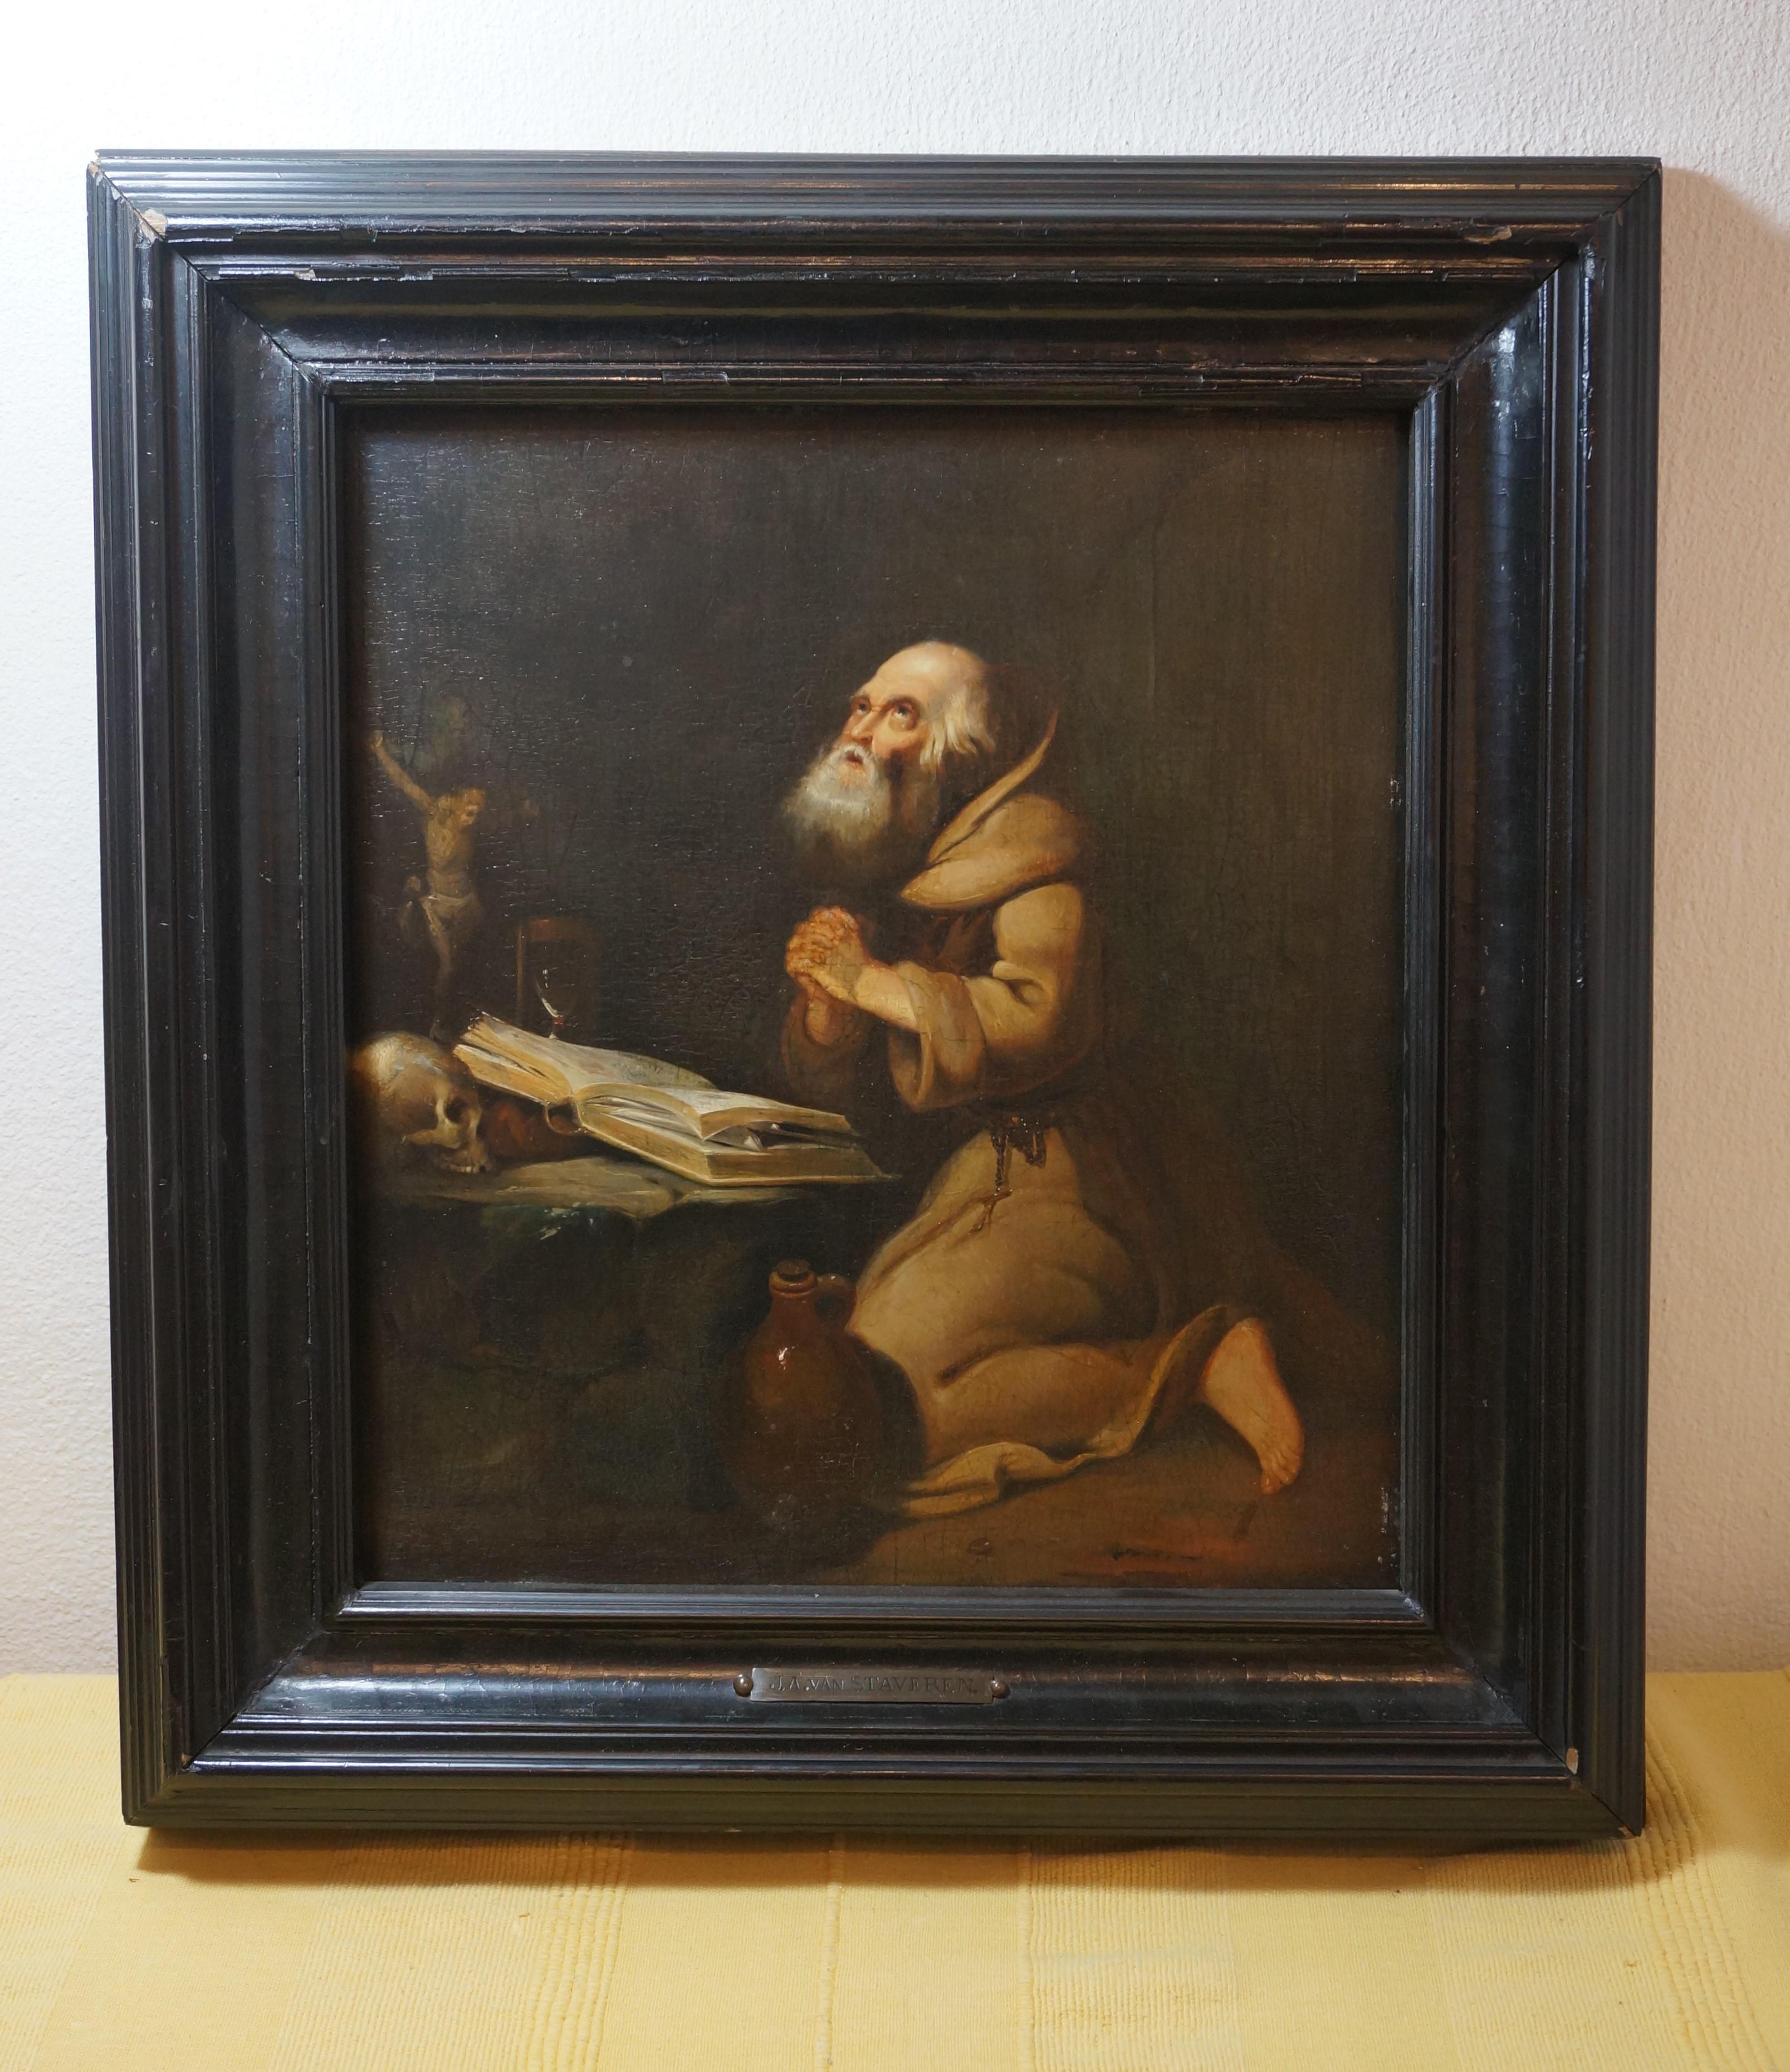 Antique religious painting, Praying hermit, oil on panel, Dutch golden age 9